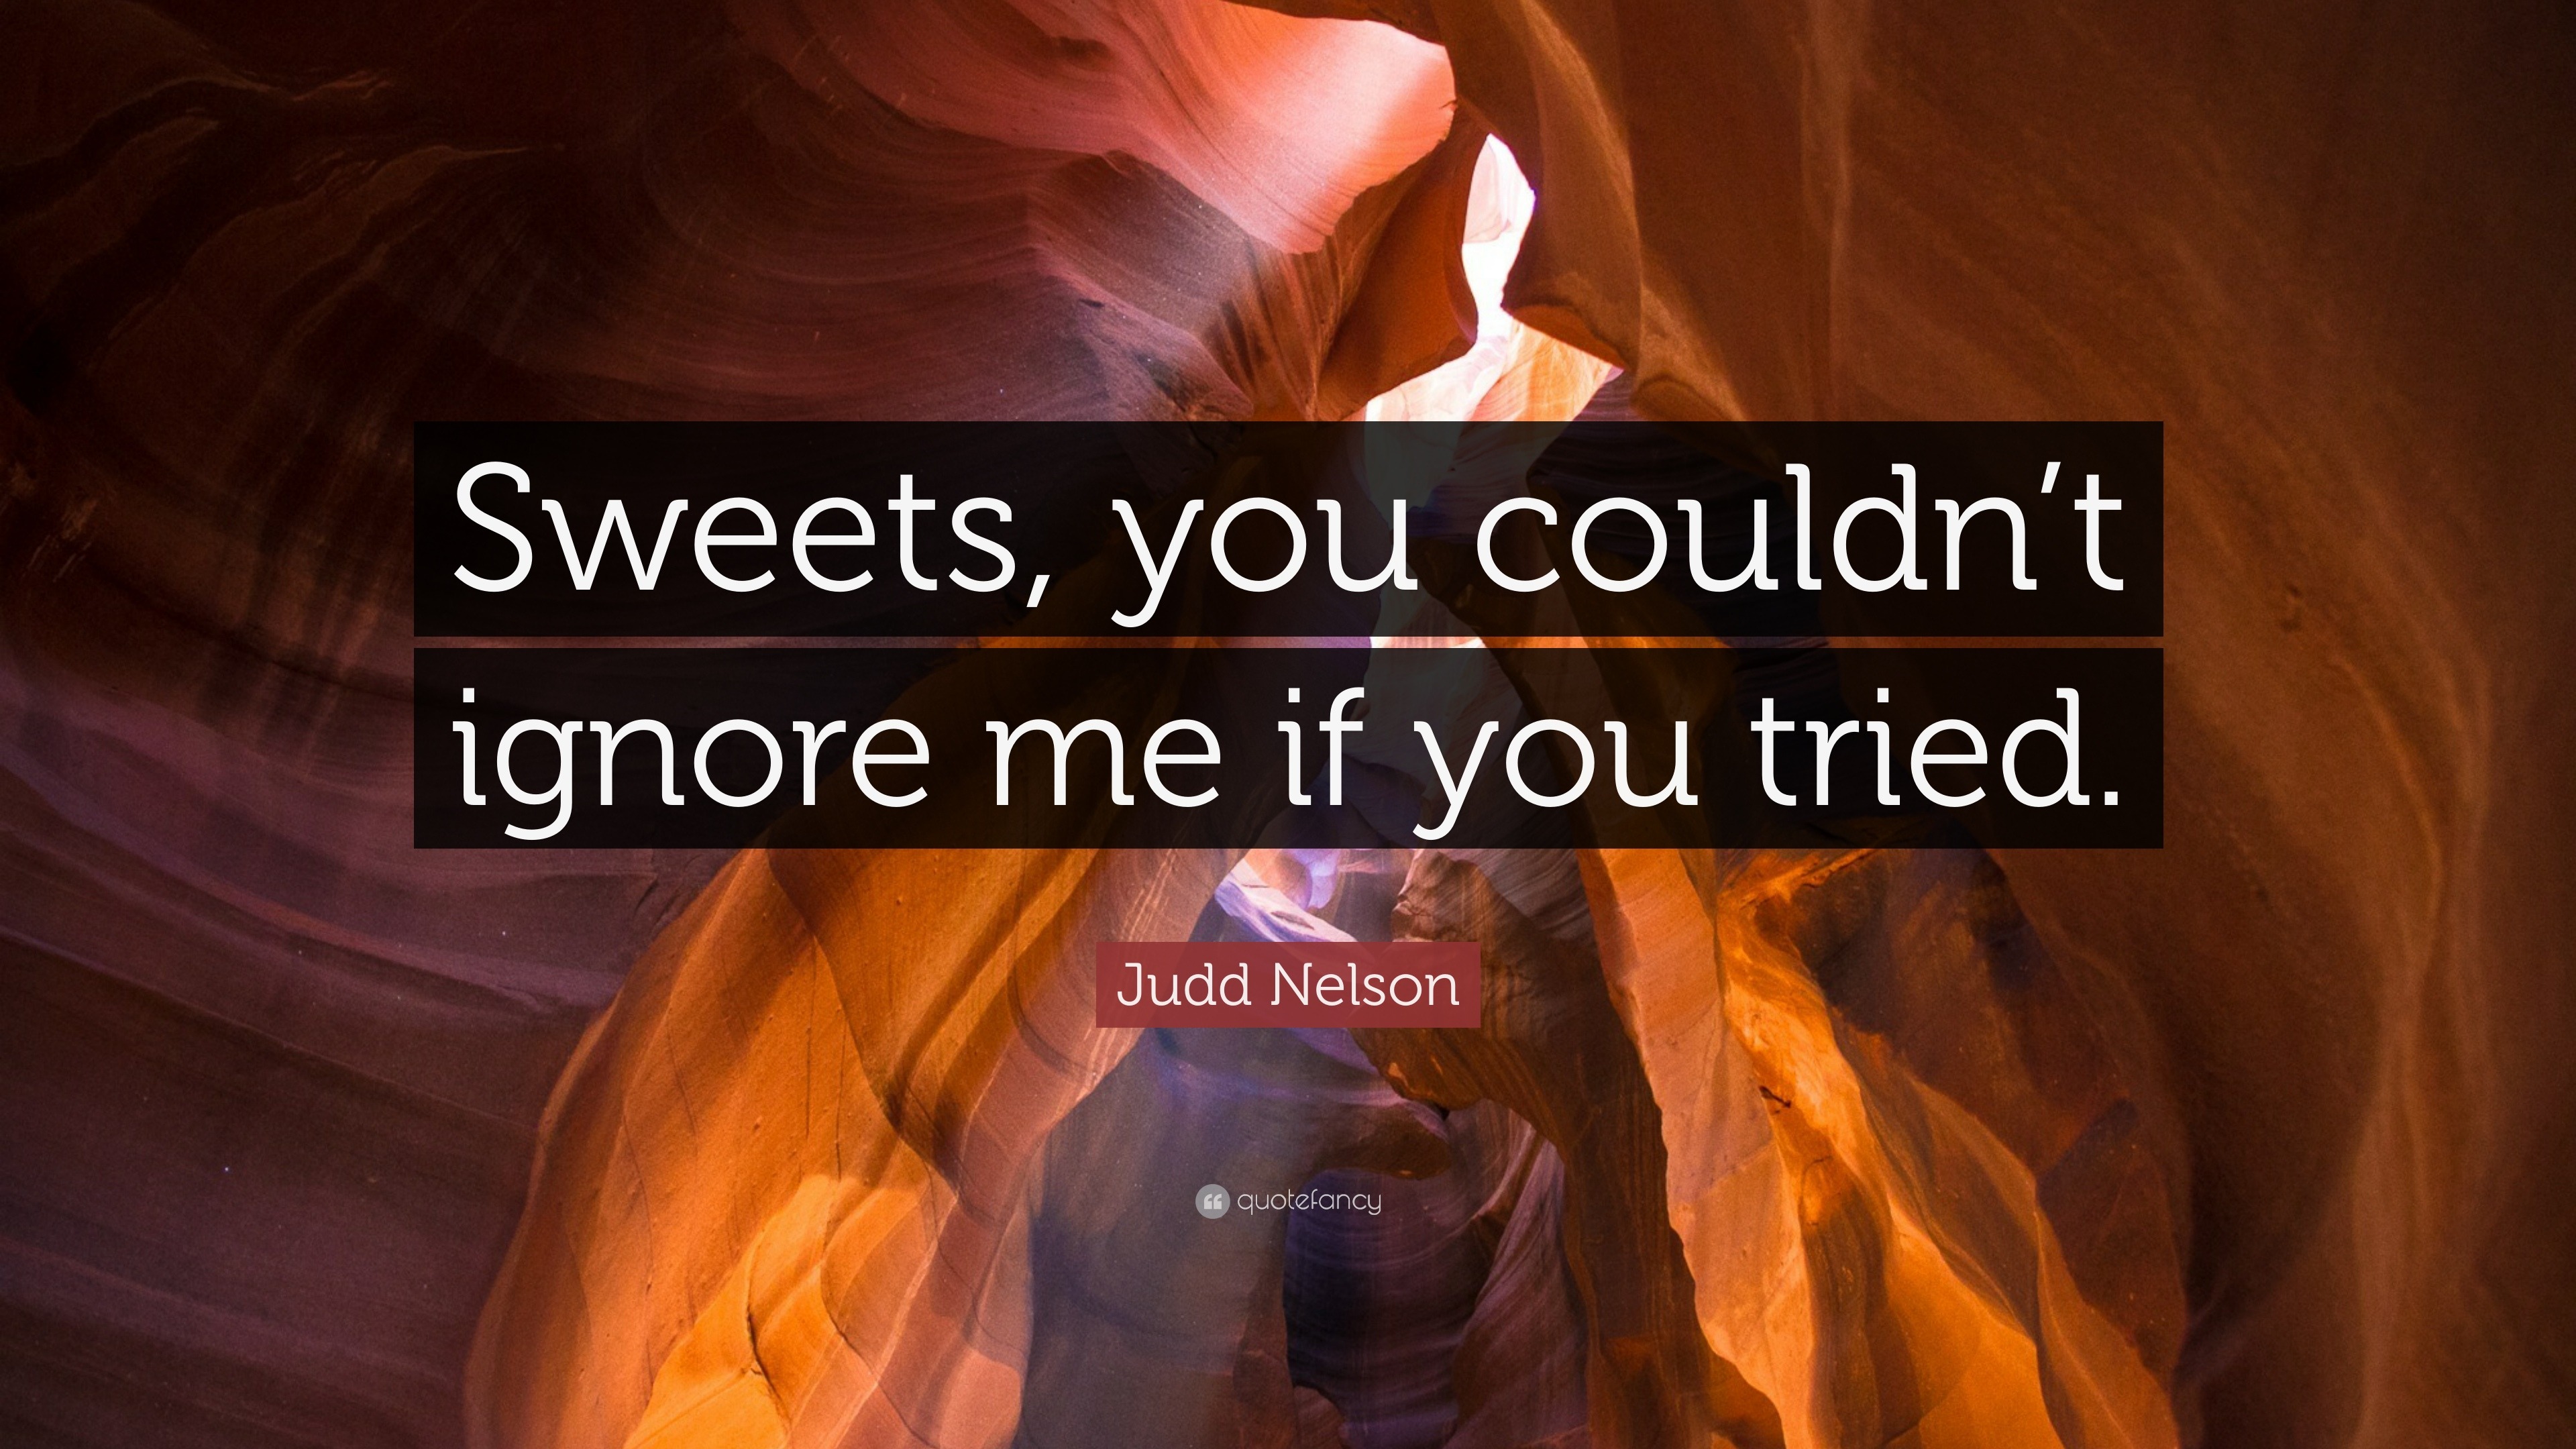 Judd Nelson Quote: “Sweets, you couldn’t ignore me if you tried.”